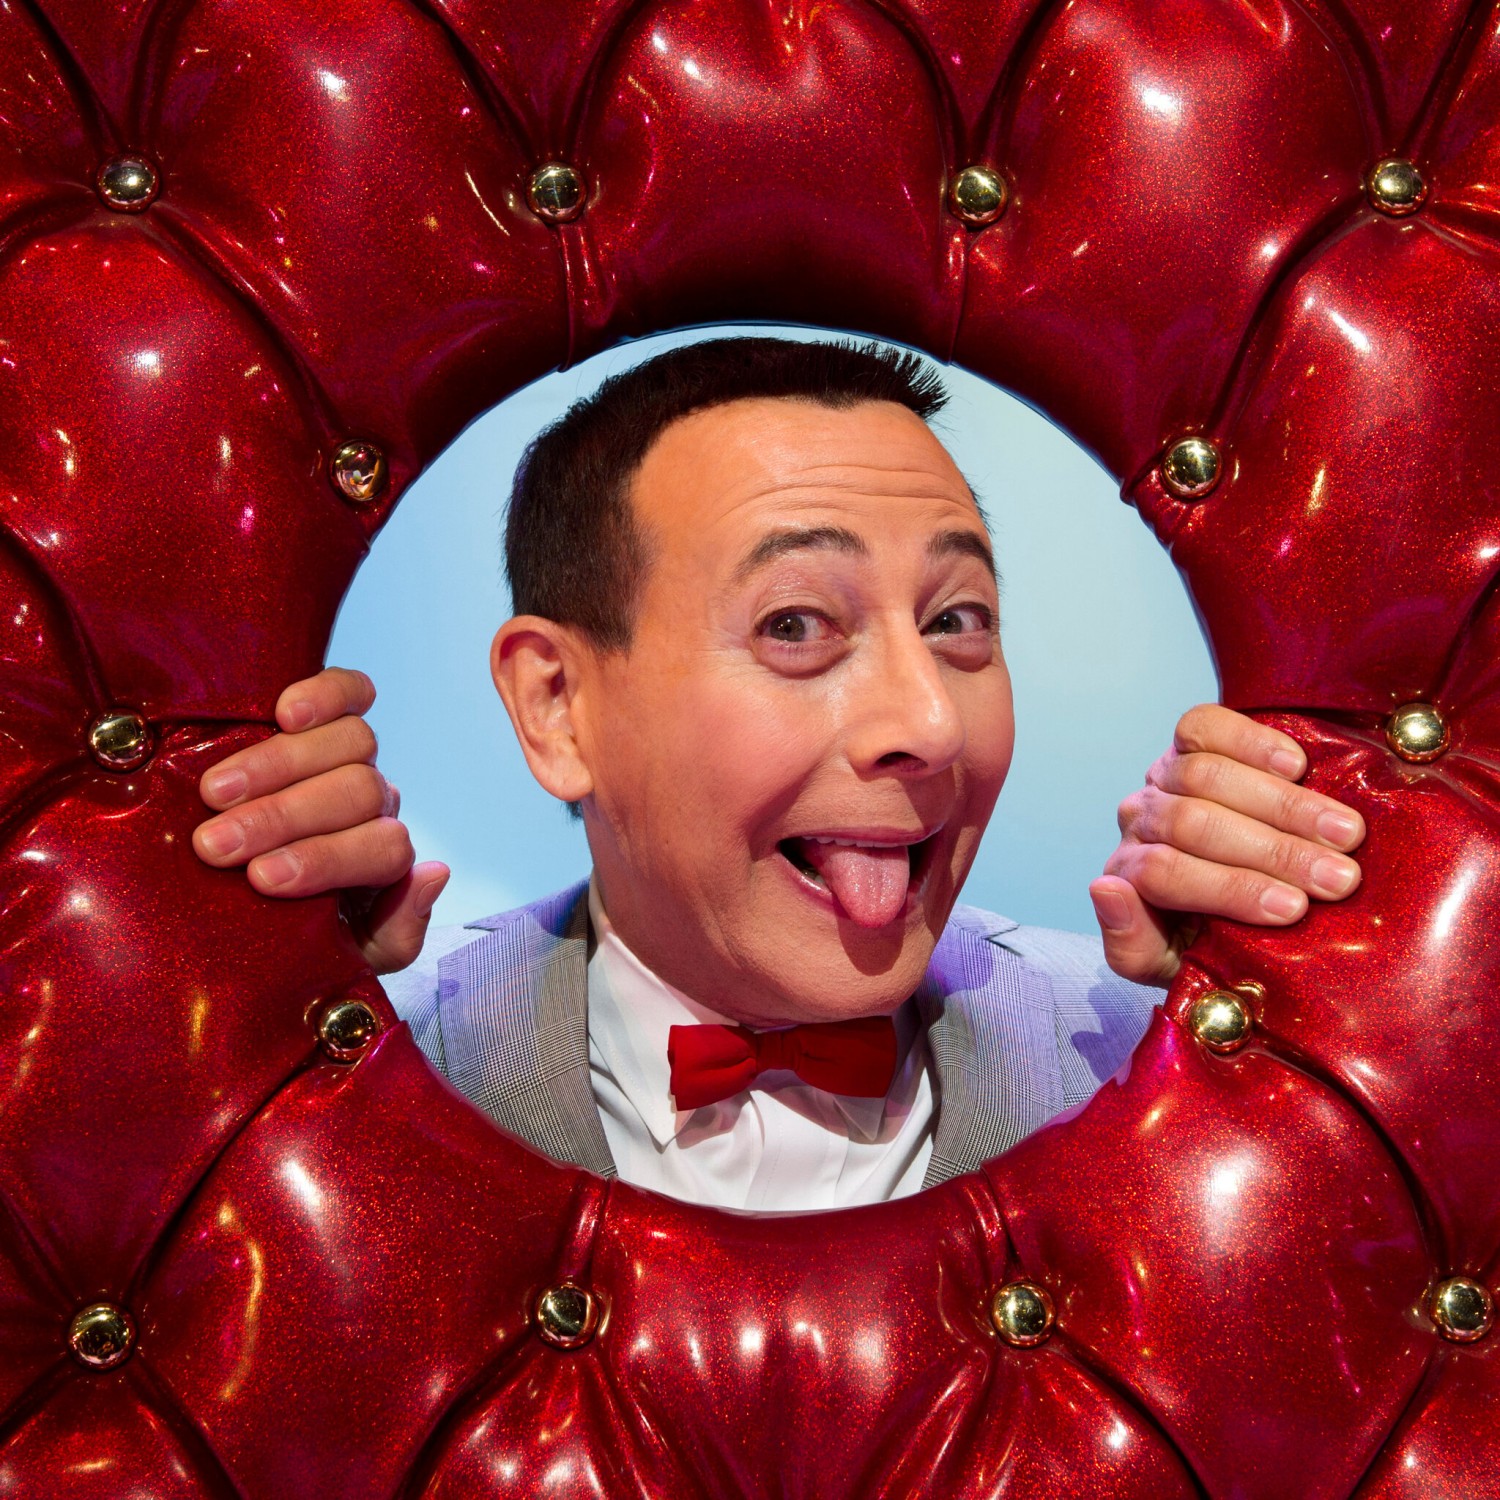 Paul Reubens, in character as Pee-wee Herman, after a performance of "The Pee-wee Herman Show" on Broadway in 2010.Credit...Charles Sykes/Associated Press